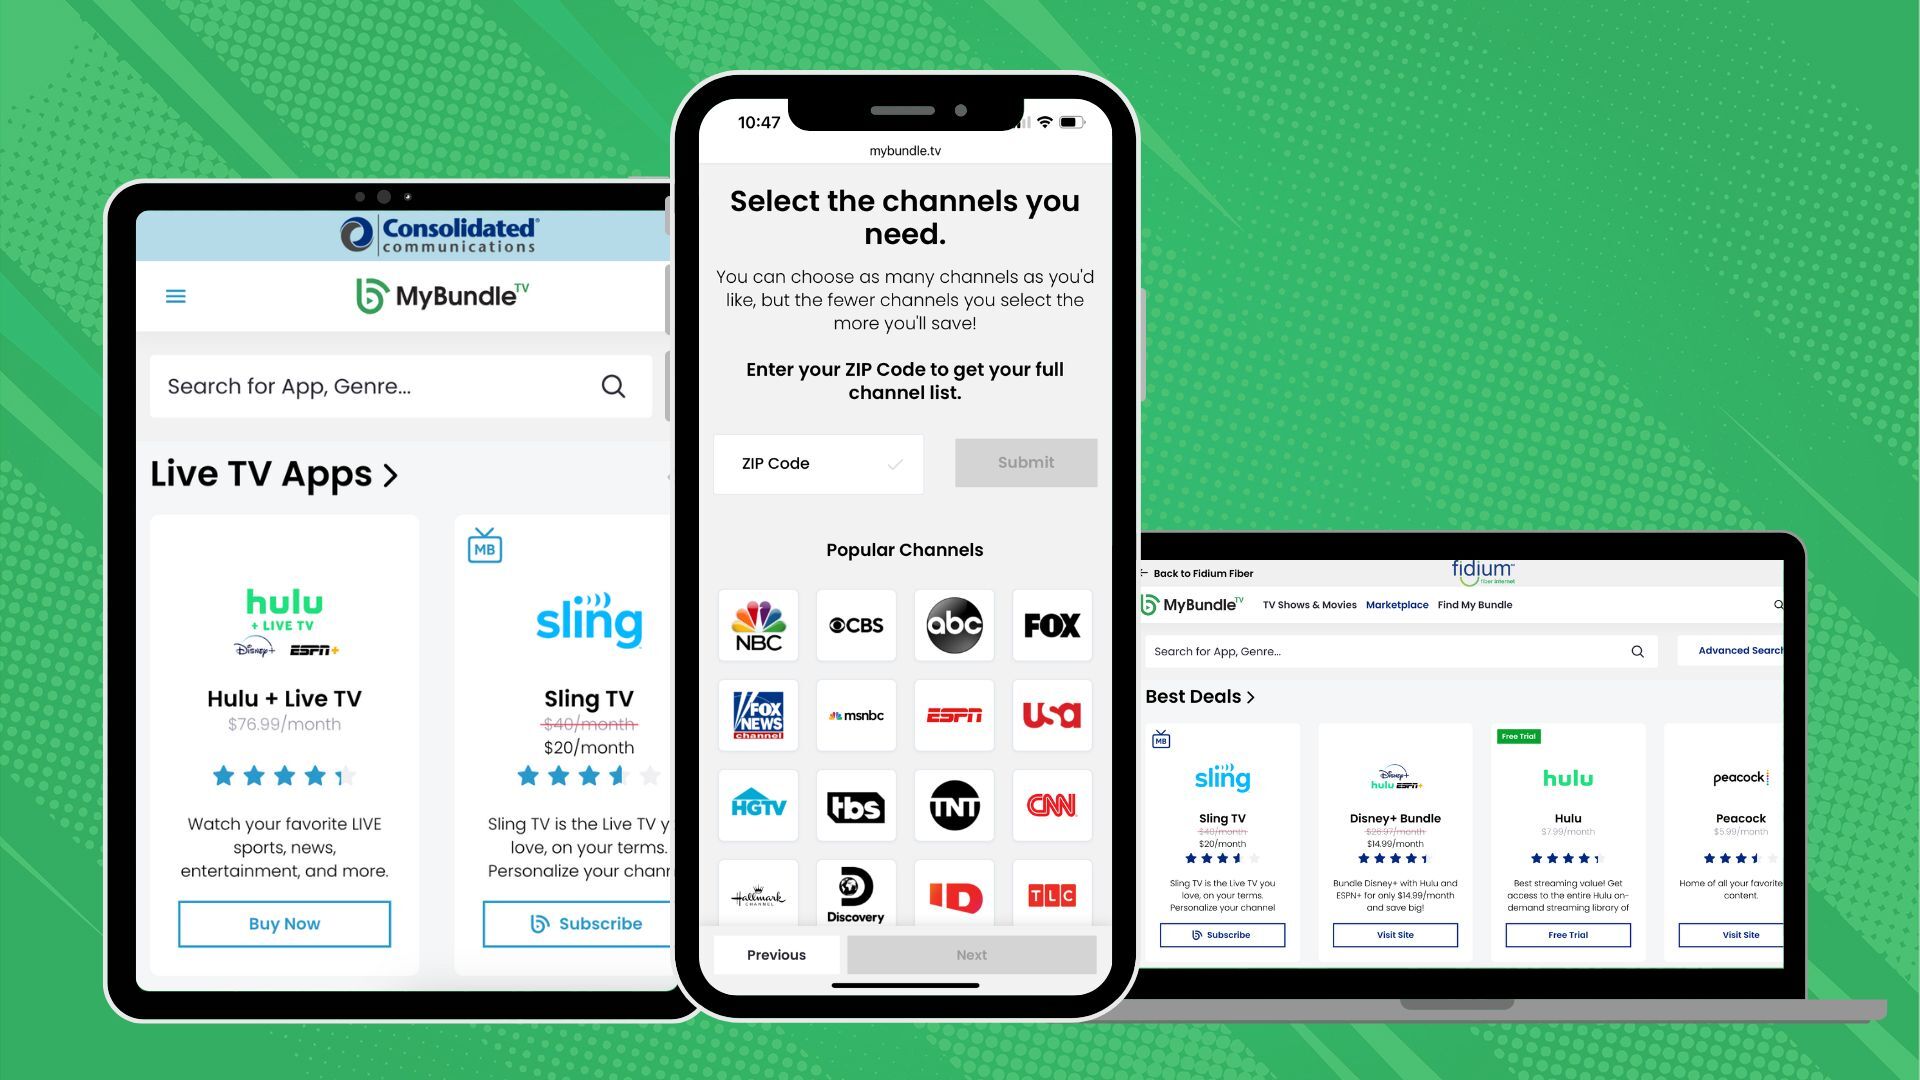 MyBundle selected by Consolidated Communications to provide customers with more TV choices; continuing their streaming future with new partnership